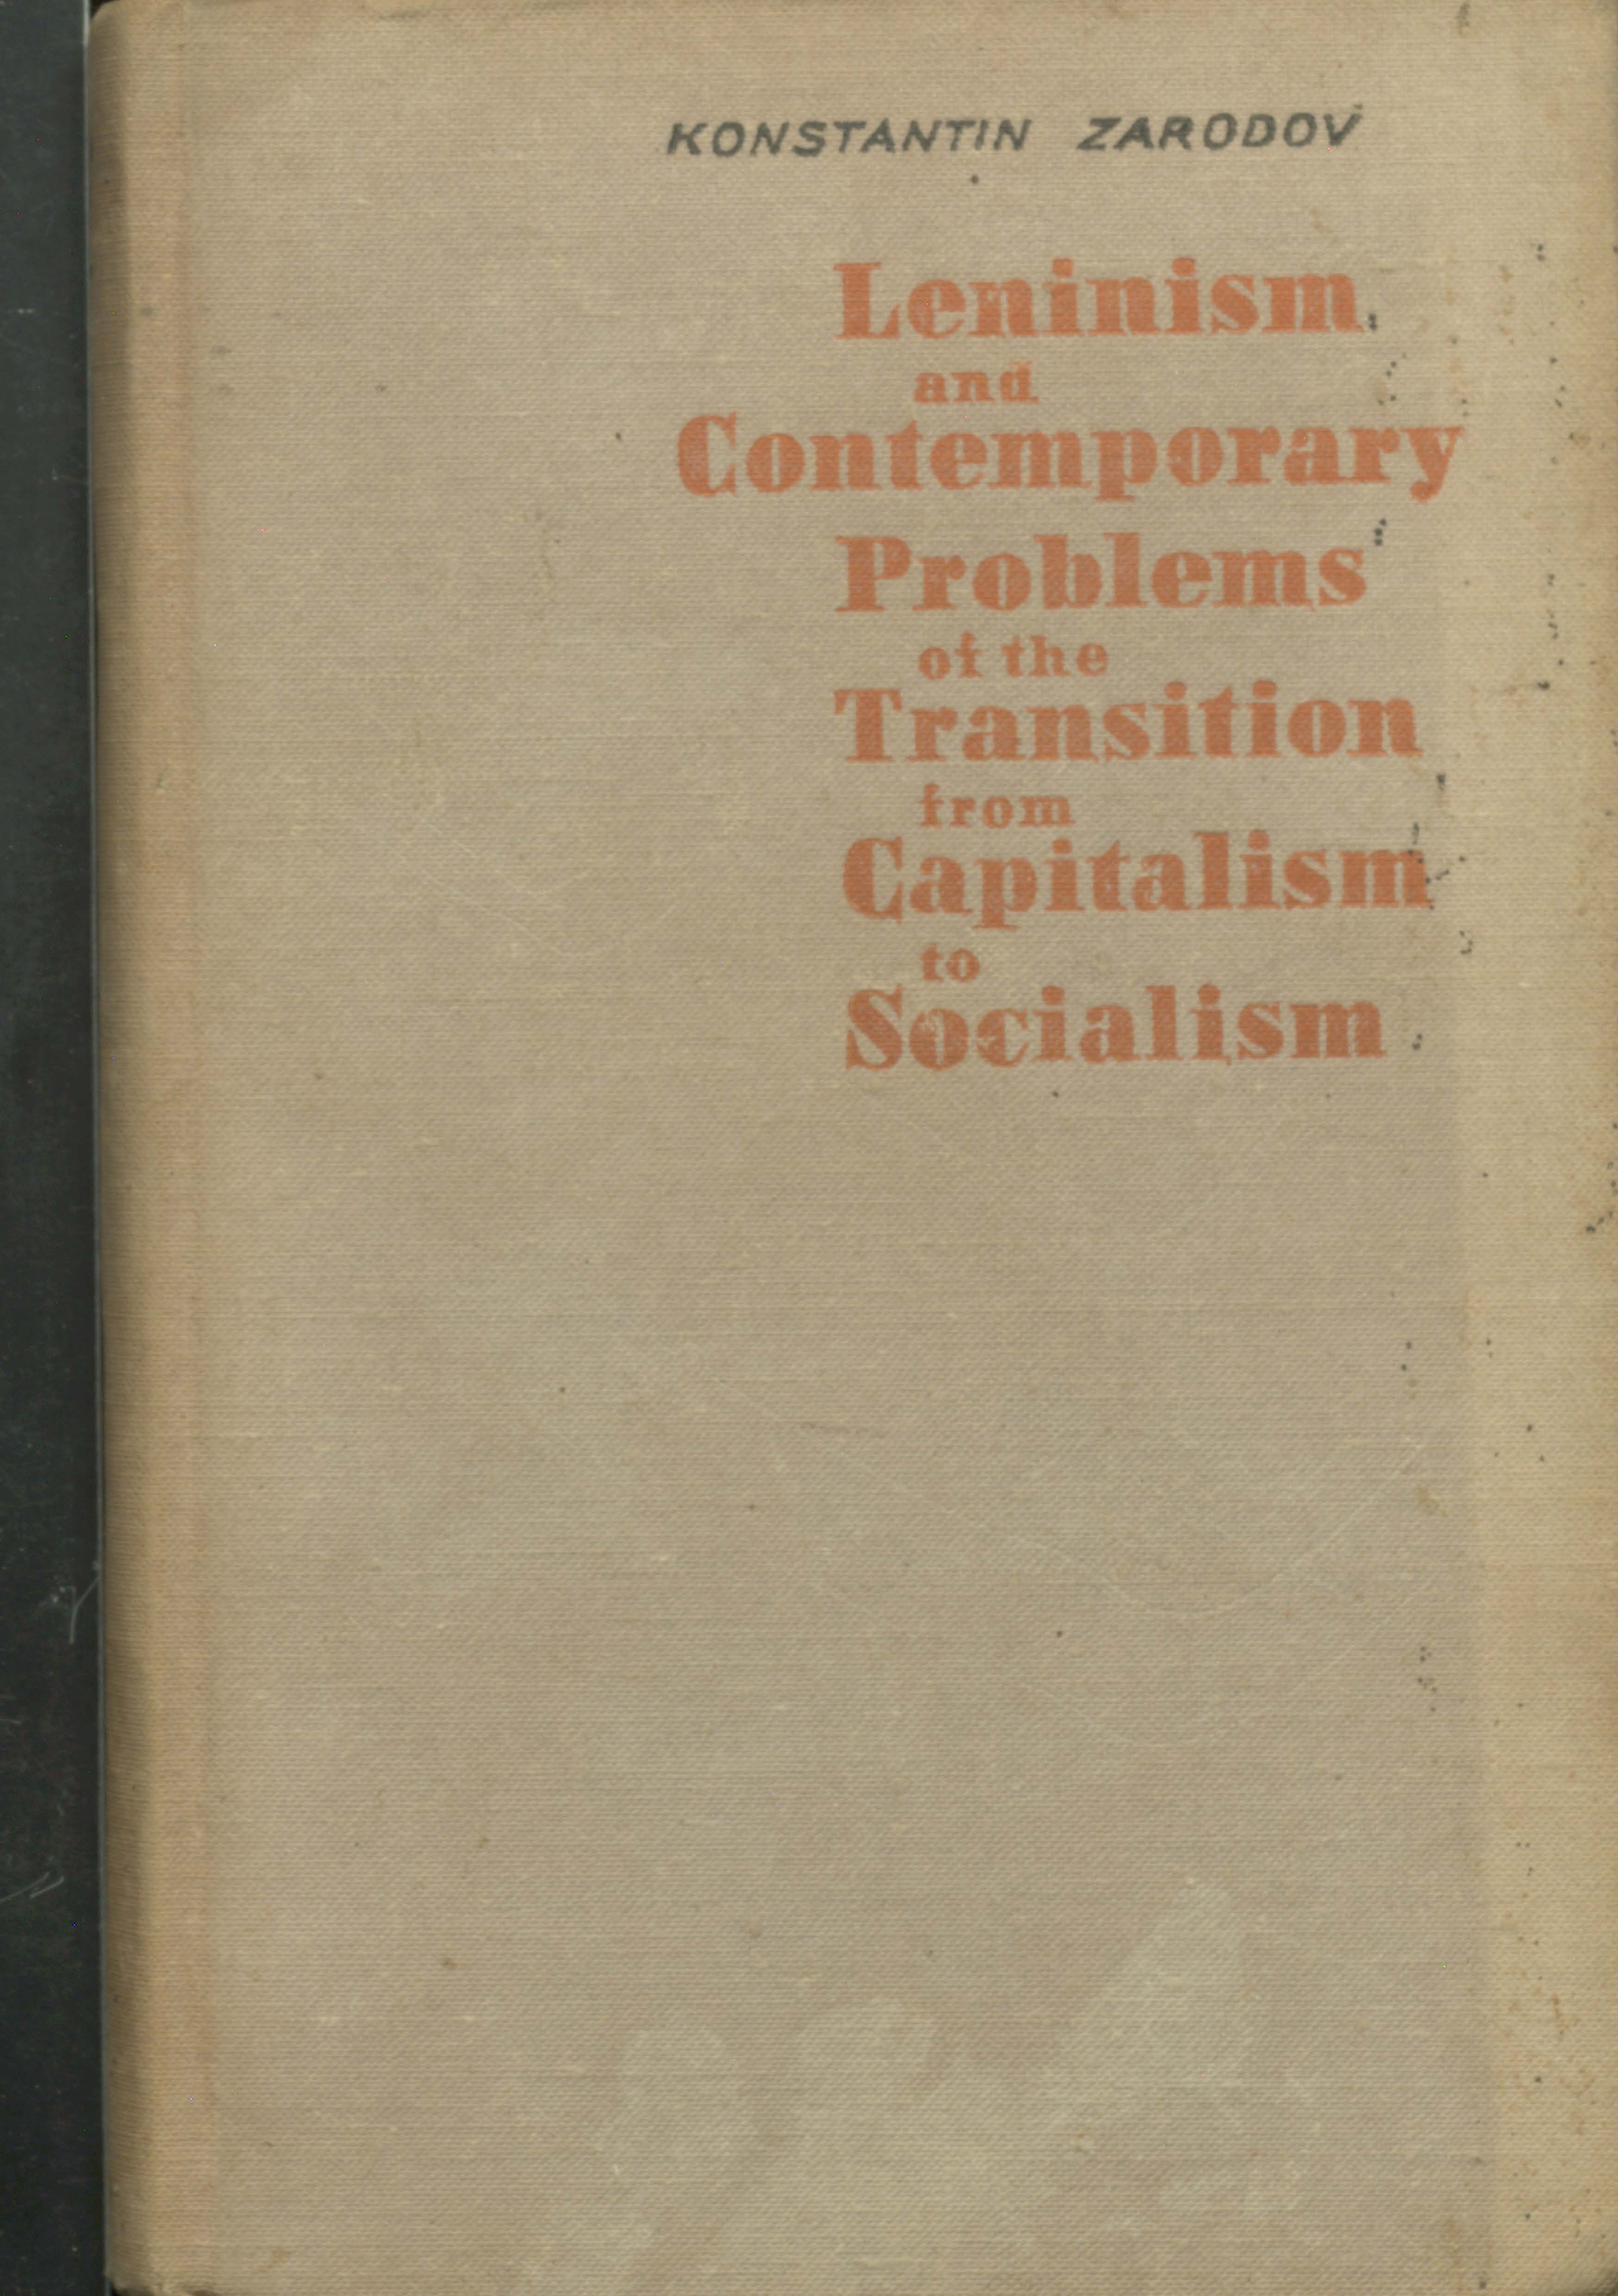 Leninism and contemporary problems of the transition from capitalism to socialism